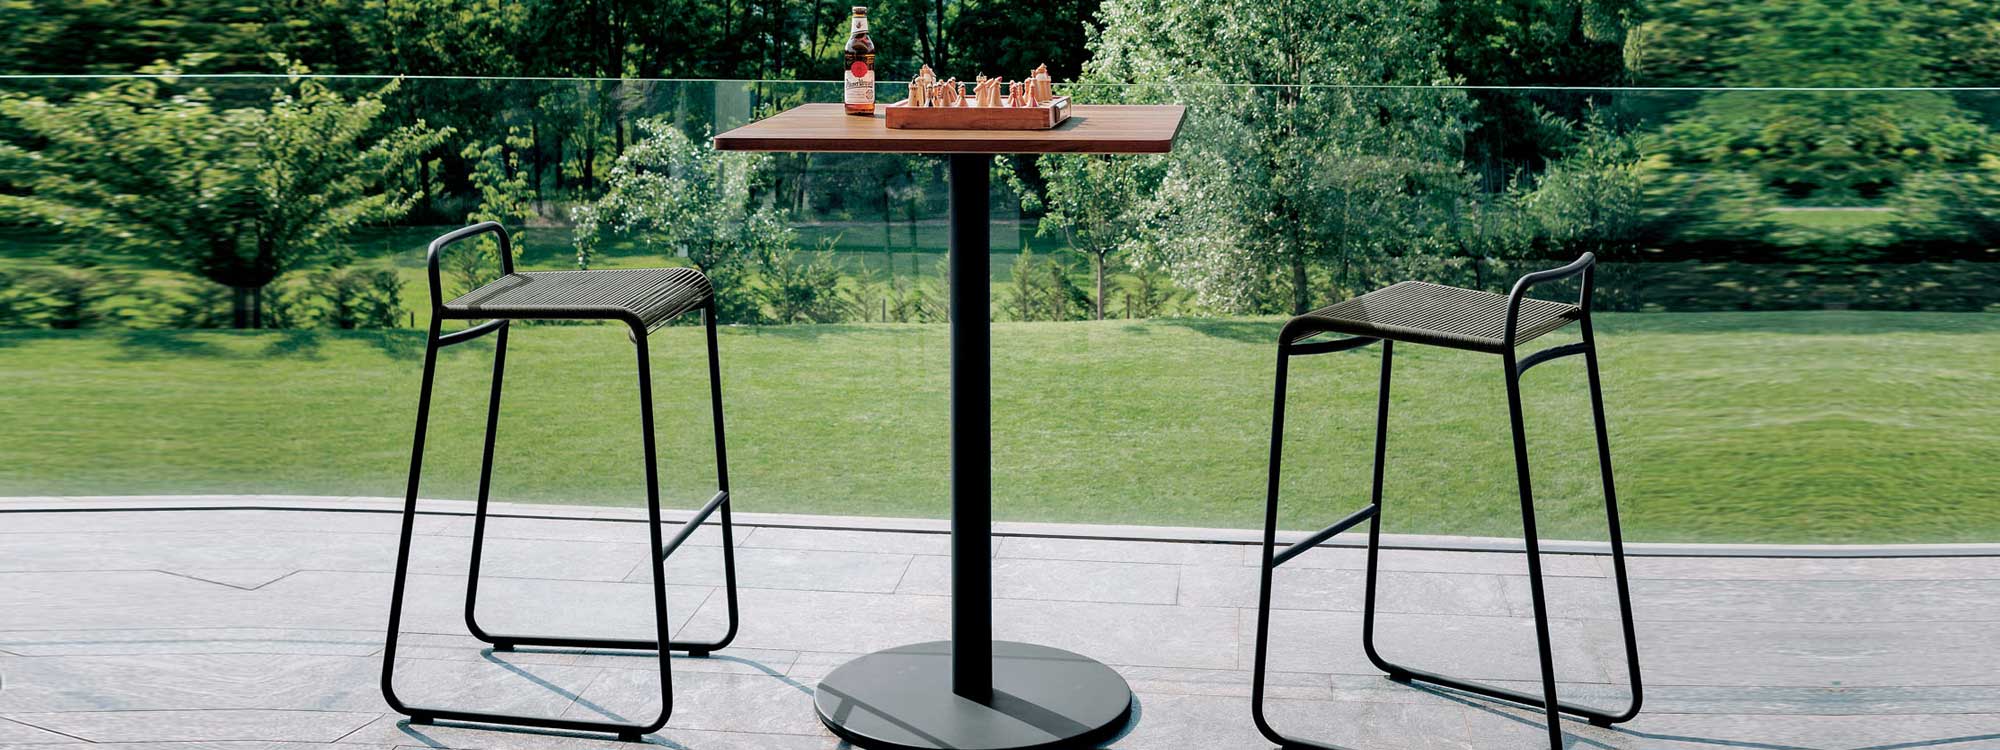 Image of pair of RODA Harp bar stools with tubular frame and acrylic cord seat and back, together with Stem pedestal bar table on terrace, with garden in background